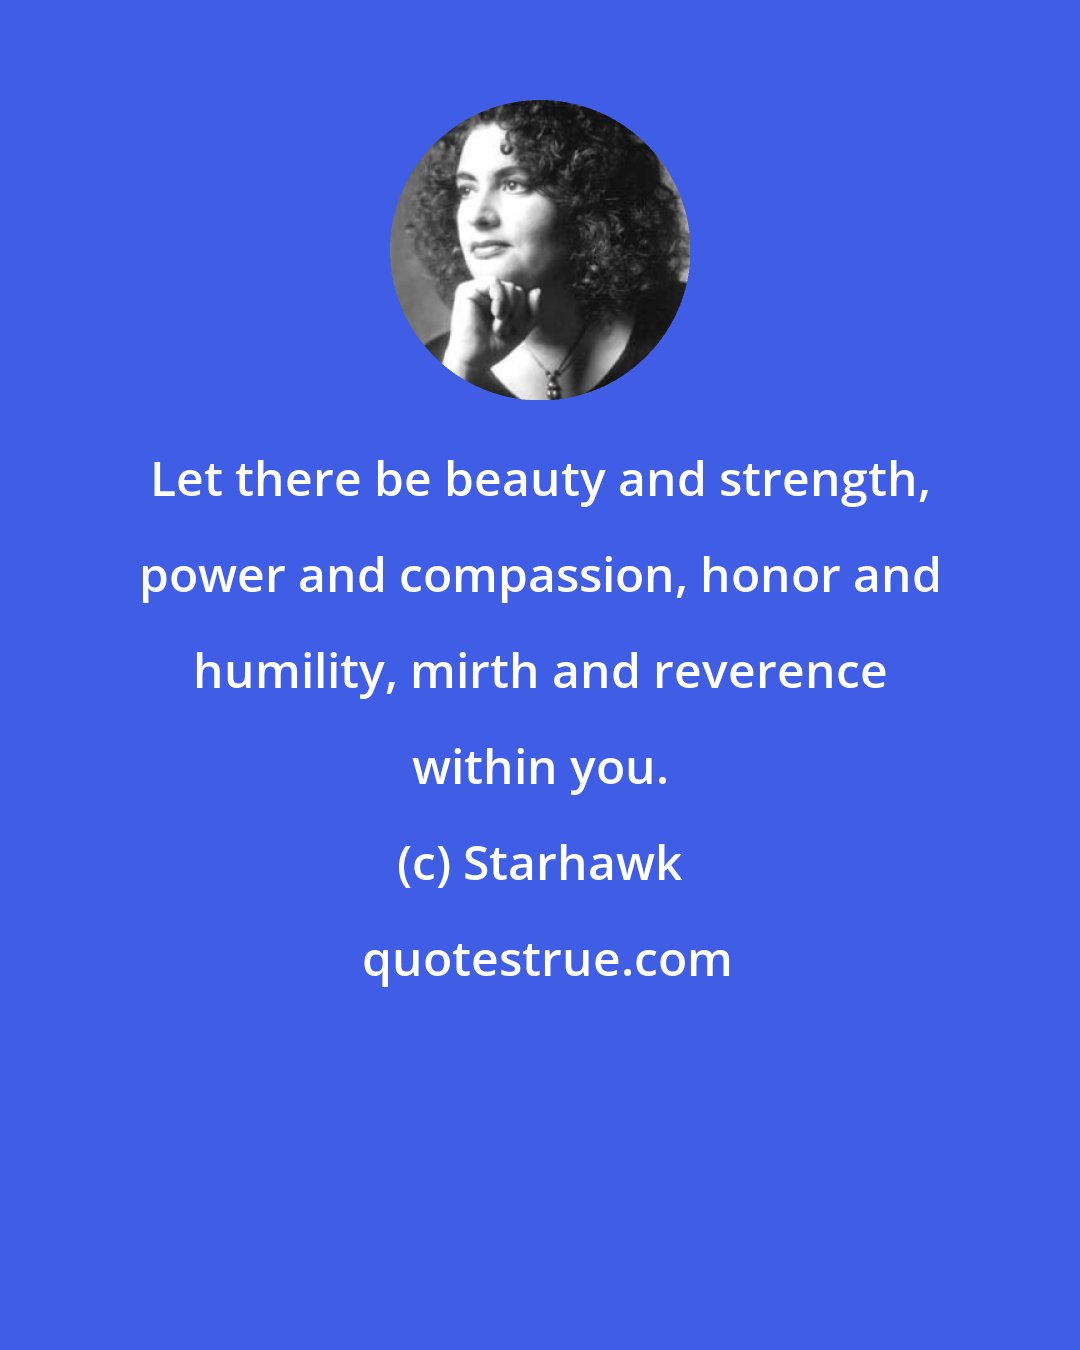 Starhawk: Let there be beauty and strength, power and compassion, honor and humility, mirth and reverence within you.